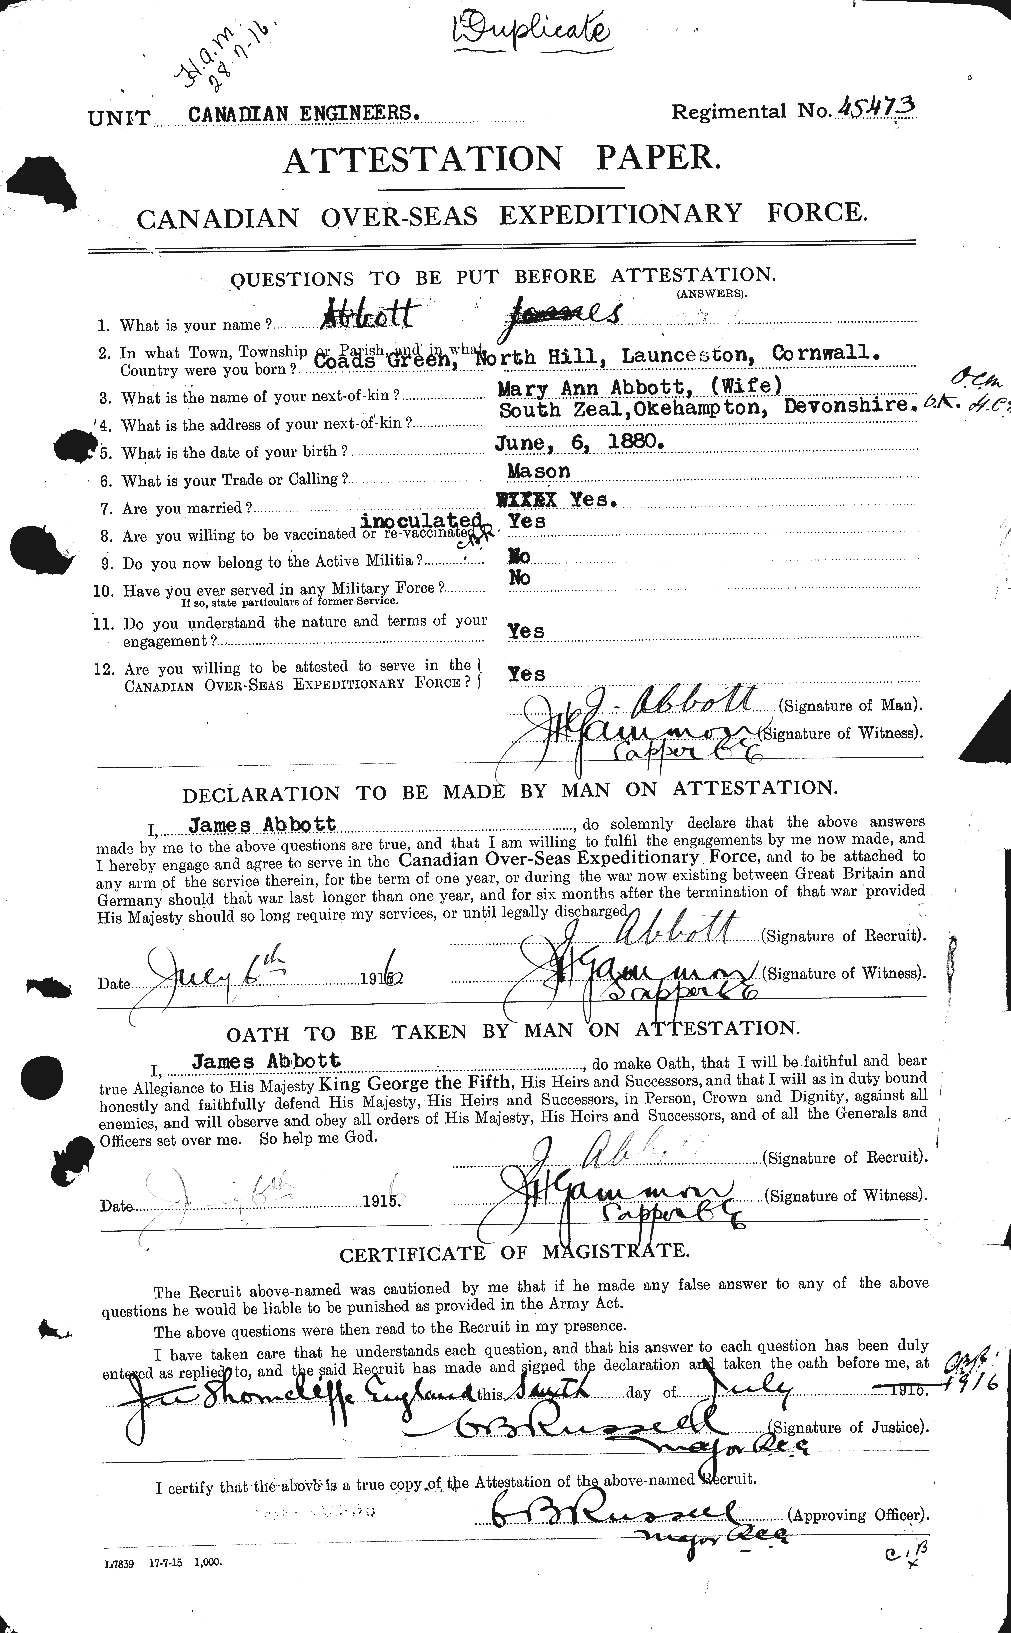 Personnel Records of the First World War - CEF 200973a